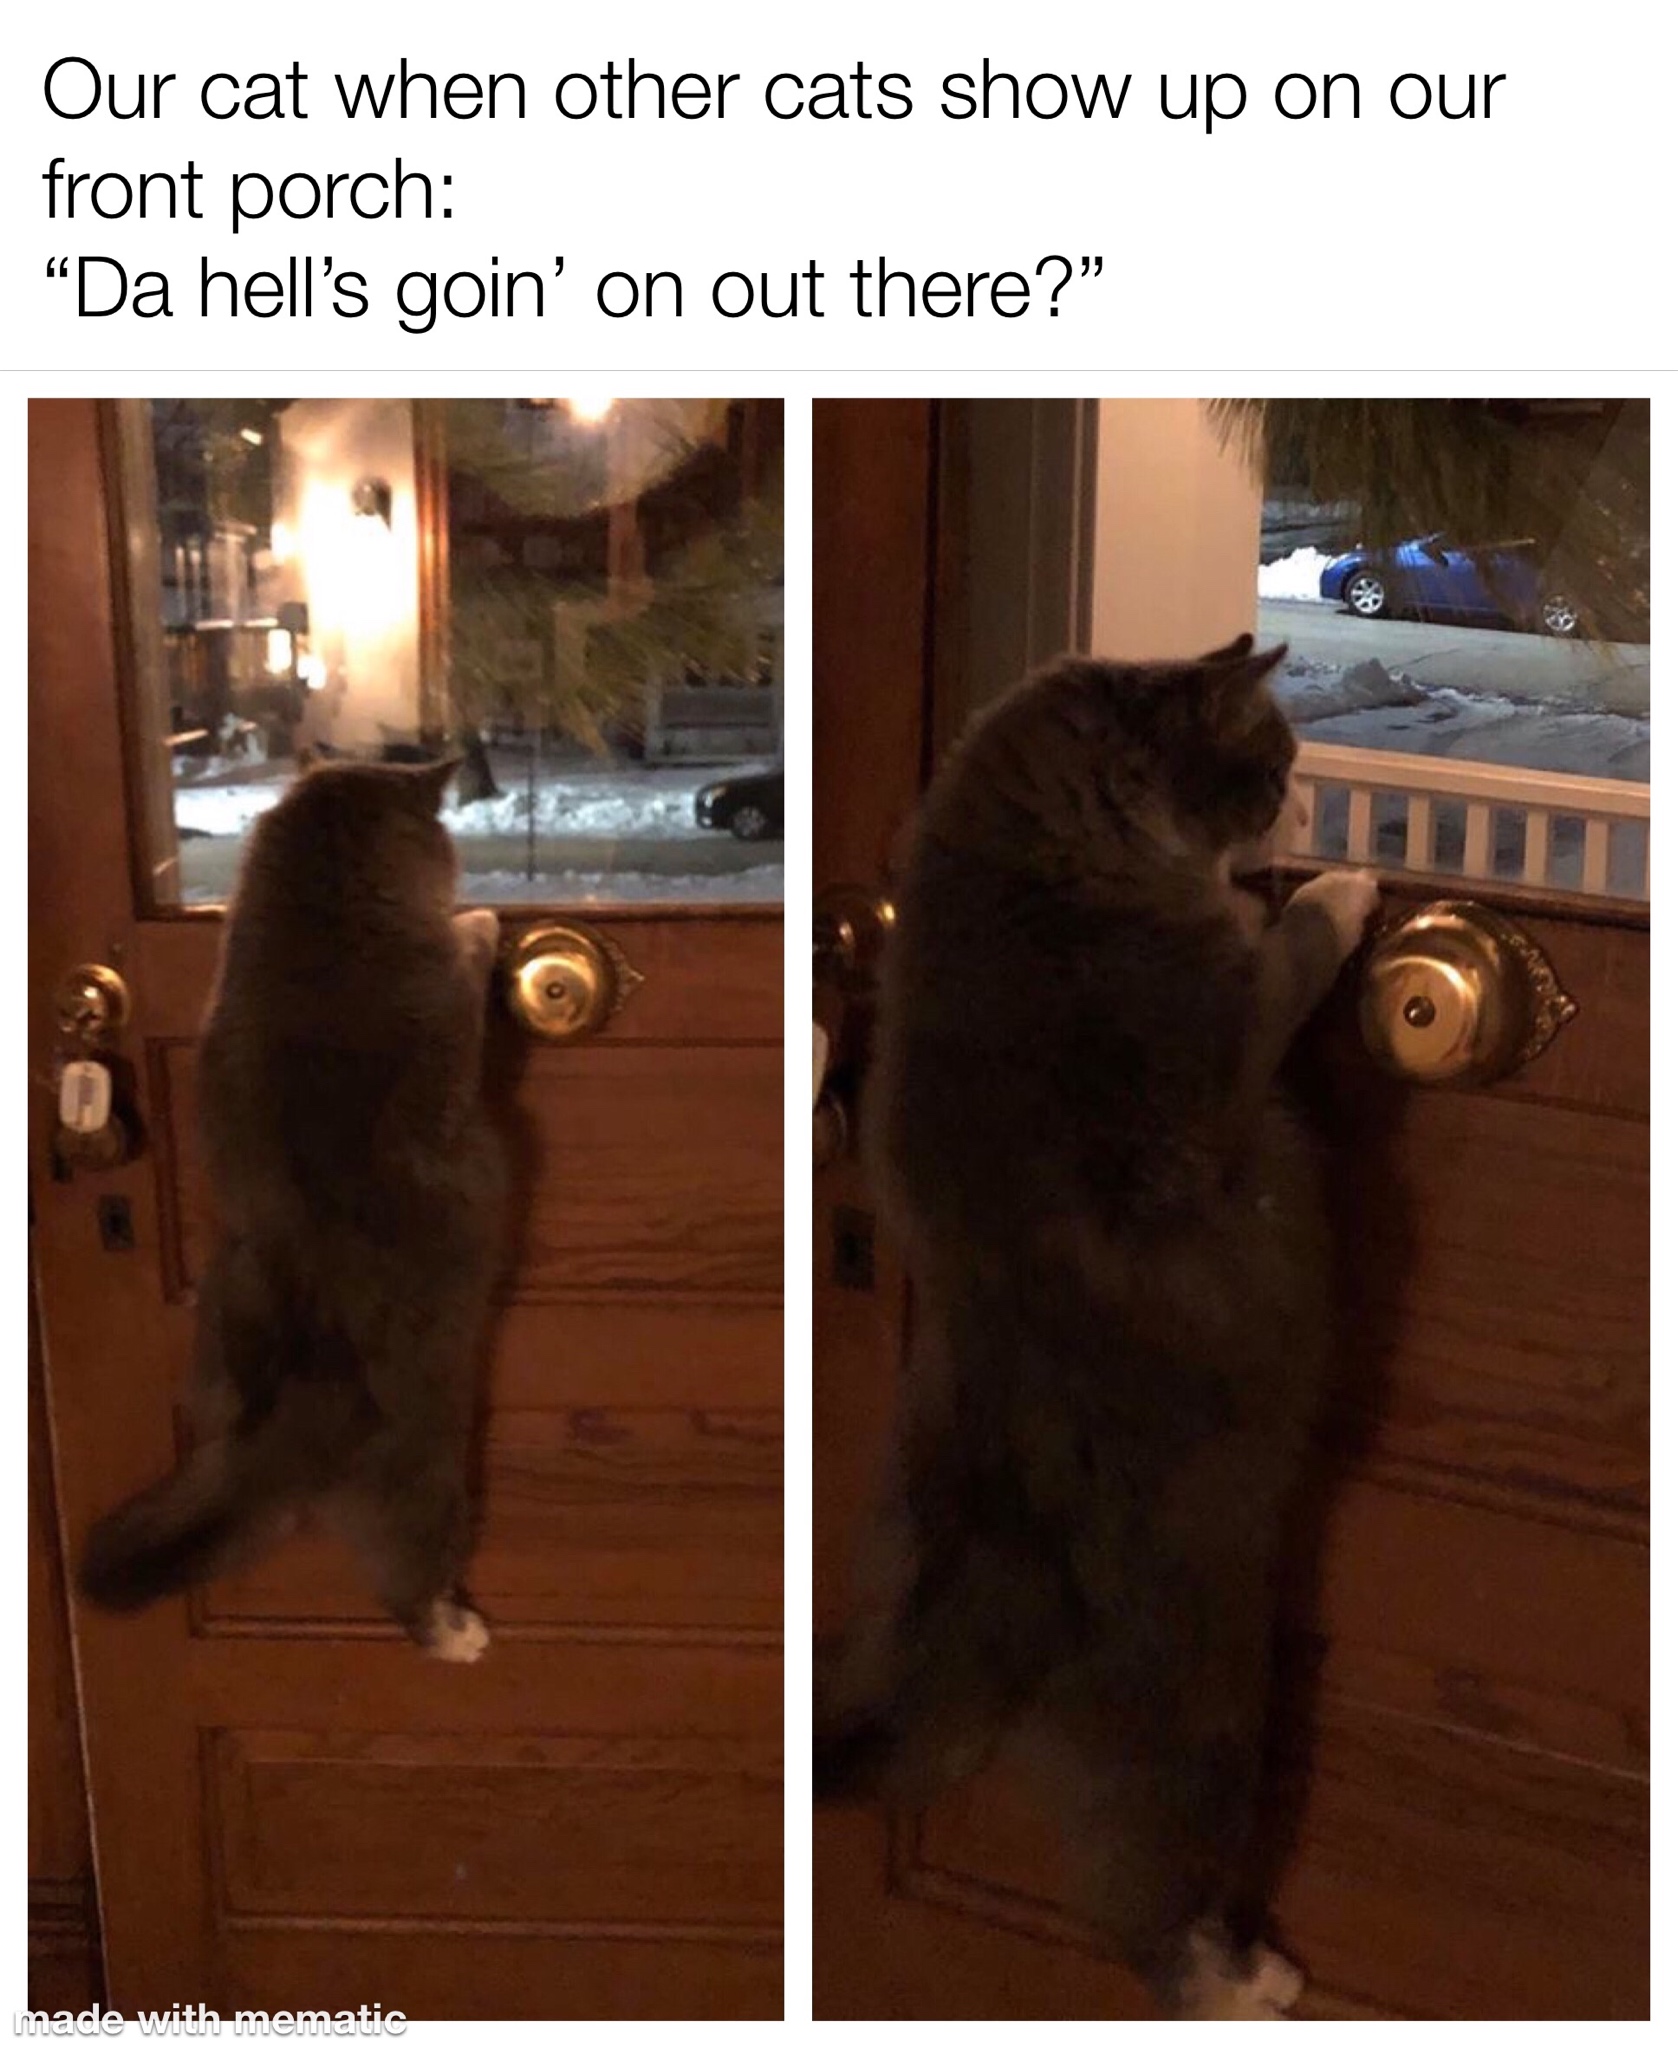 photo caption - Our cat when other cats show up on our front porch "Da hell's goin' on out there?" Badewi the